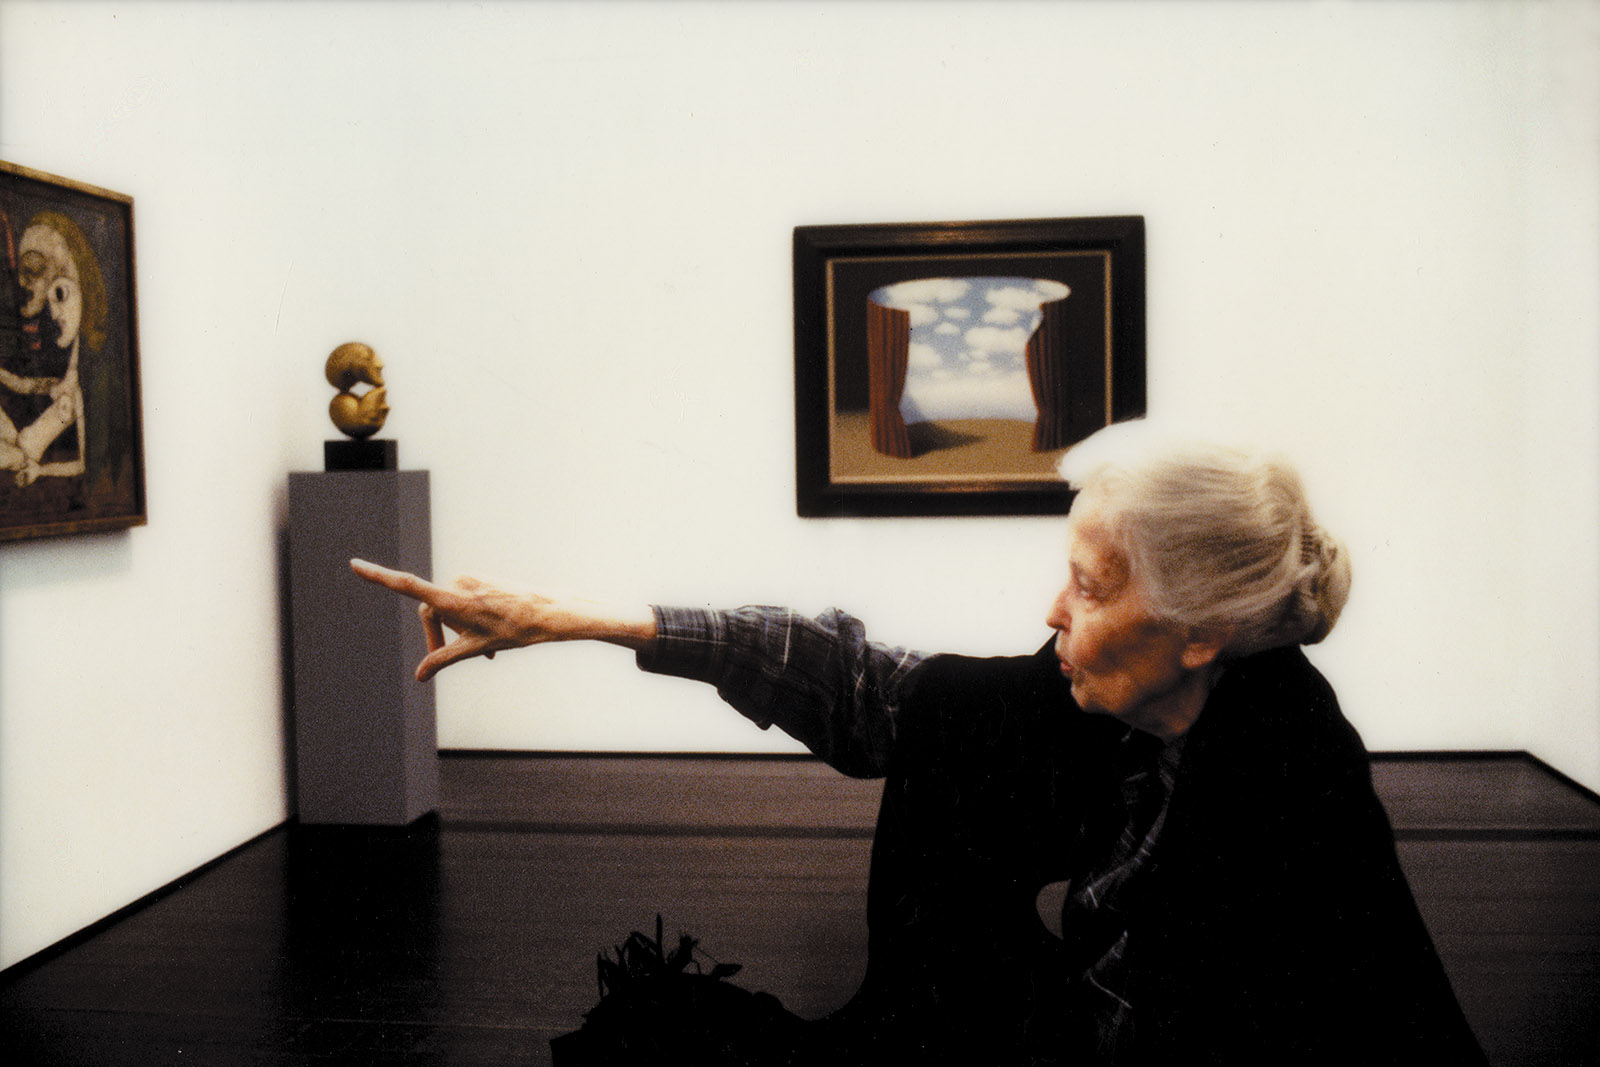 Dominique de Menil with artwork by Magritte and others, at the Menil Collection, Houston, 1990